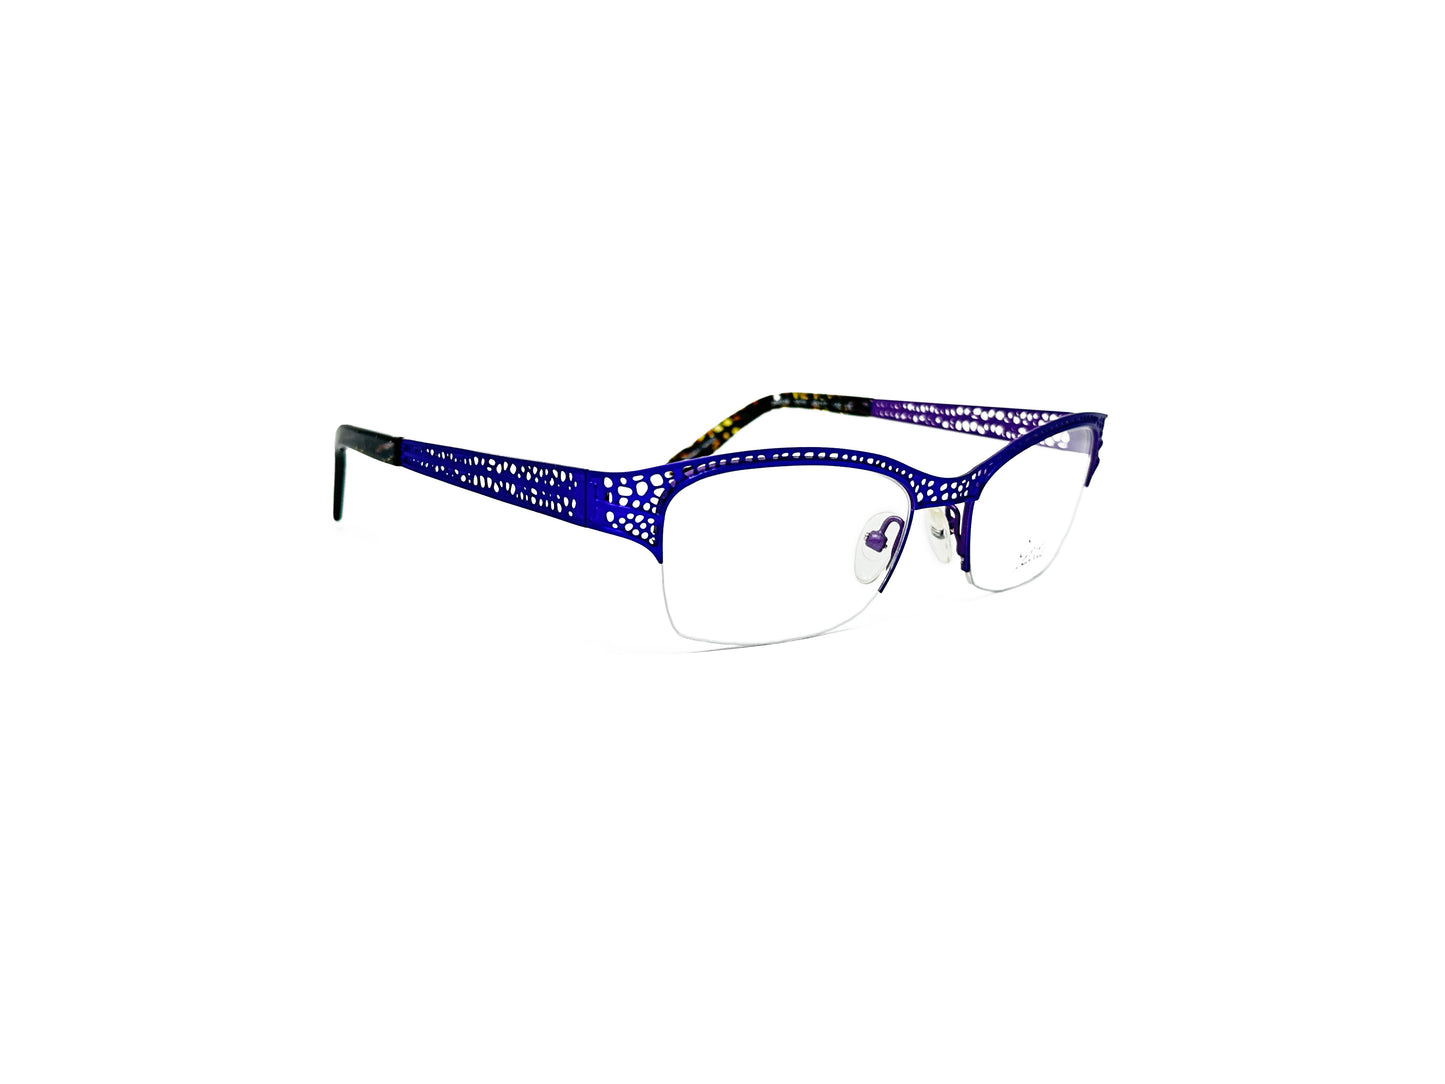 Petite rectangular, half-rim, metal optical frame with oval cut outs. Model:PM008. Color: 2570 Cobalt Blue . Side view.